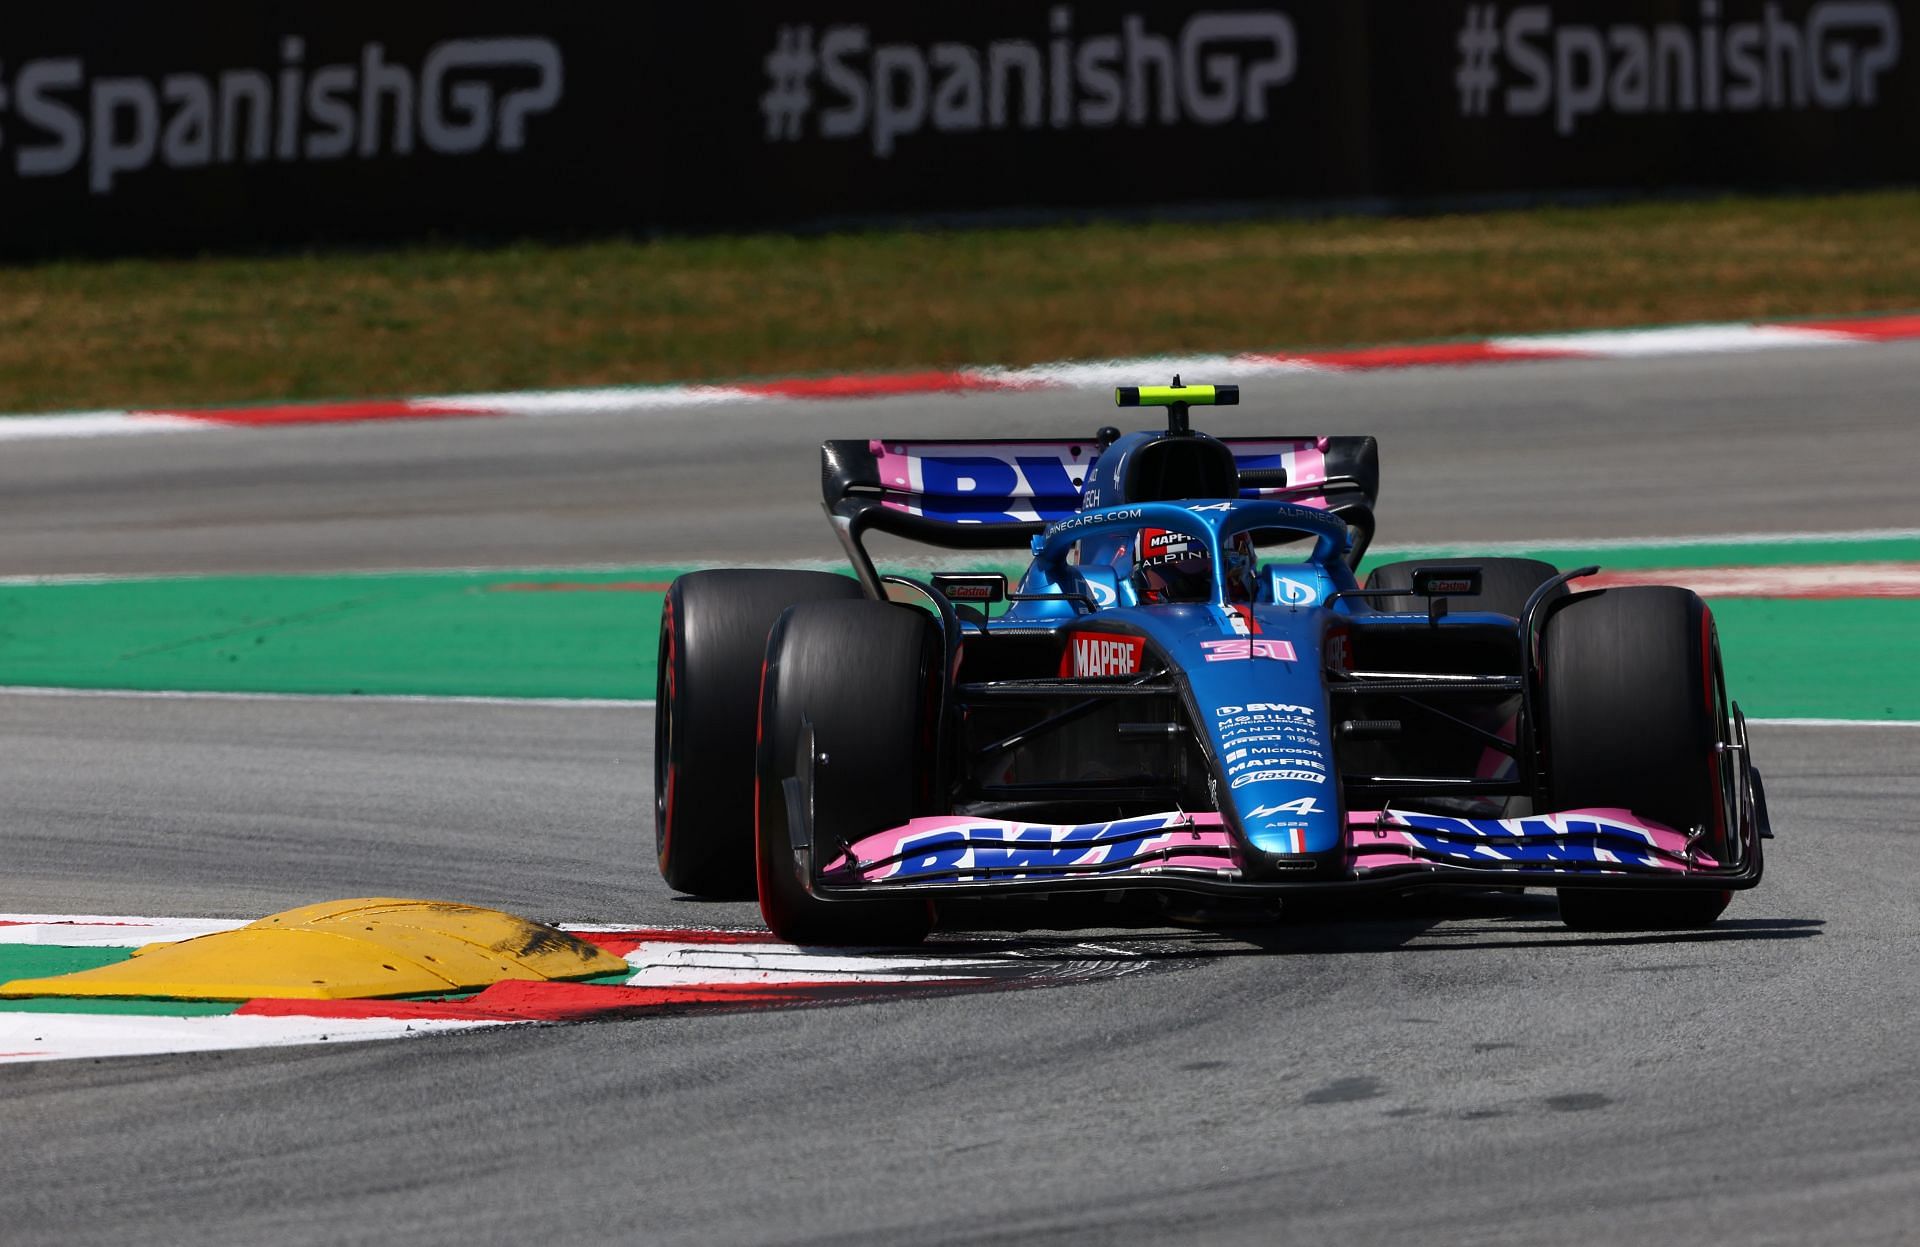 Alpine scored a double points finish in Barcelona